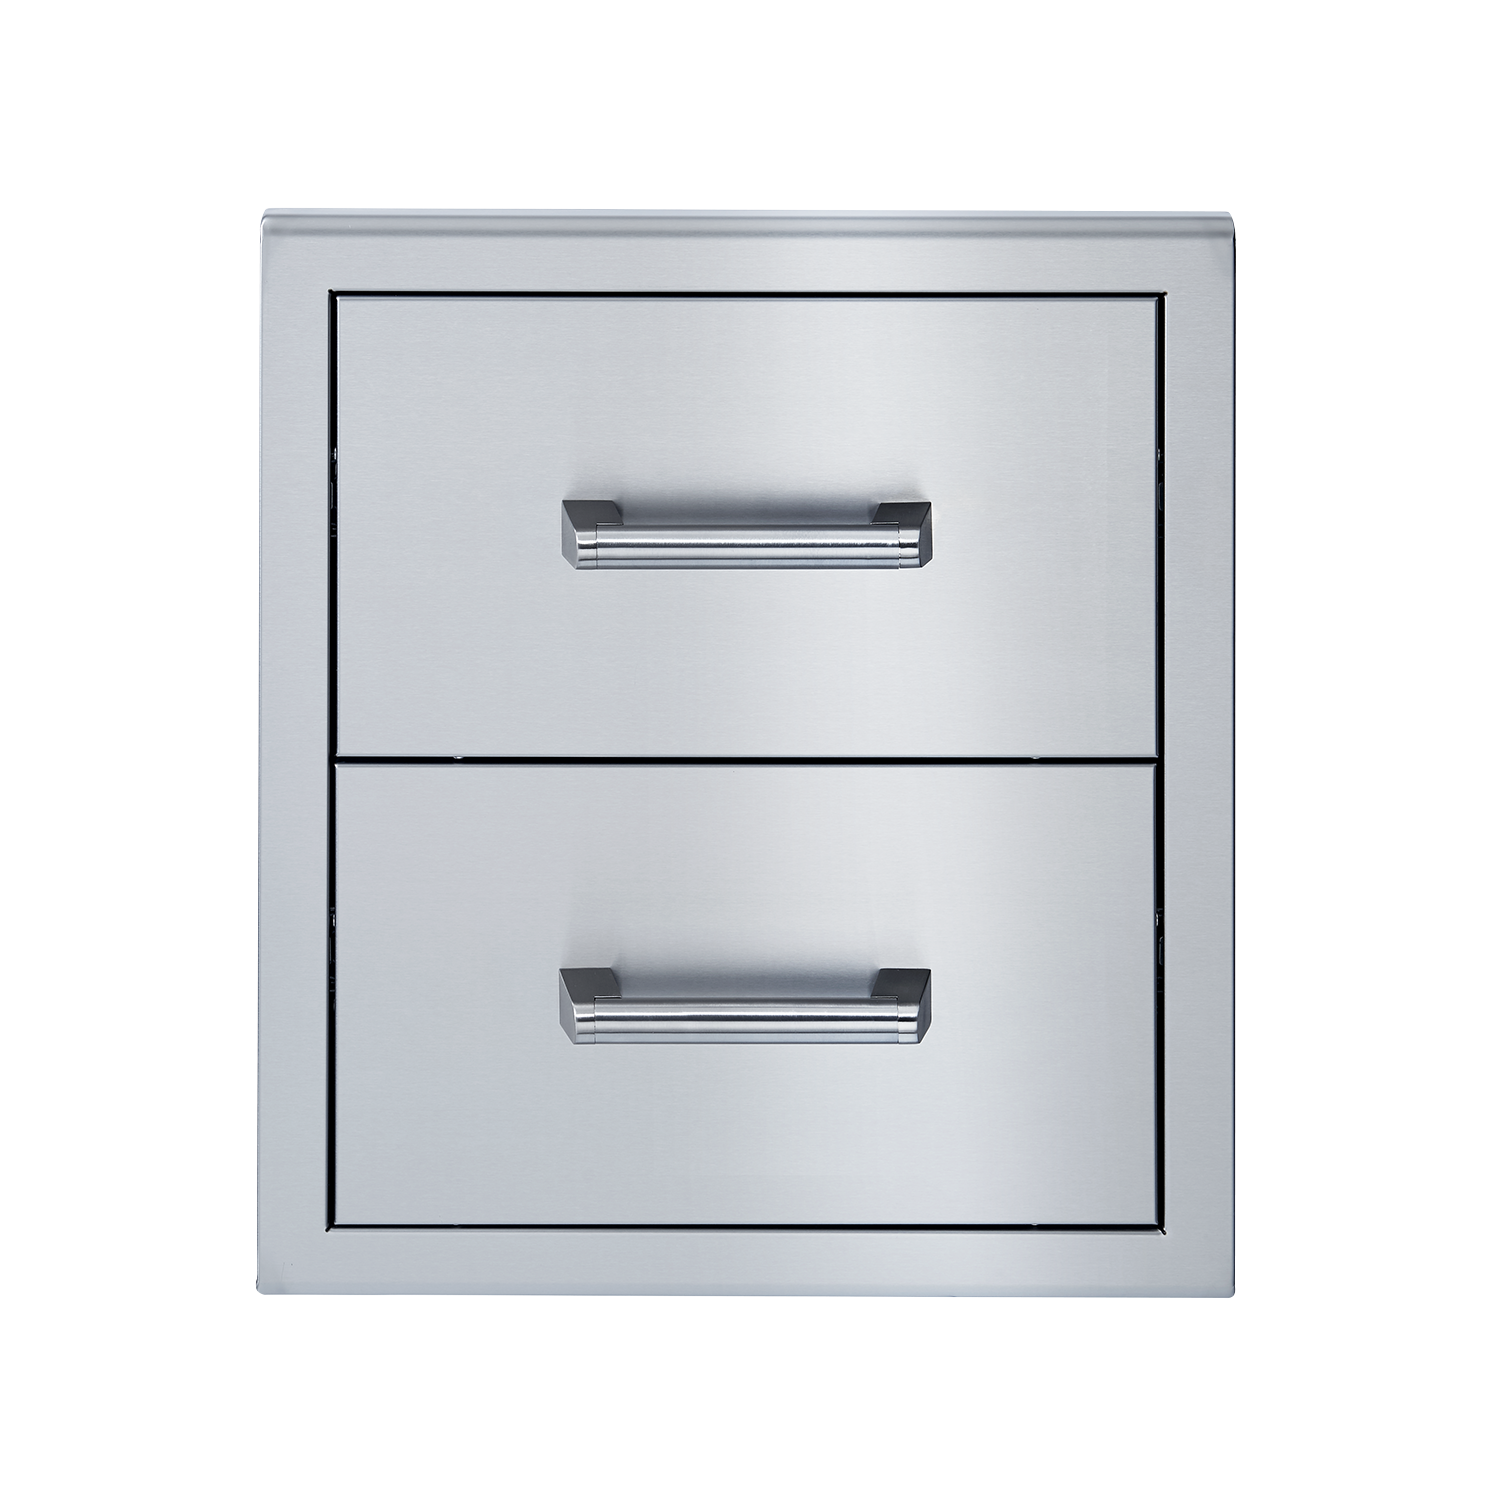 Broilmaster 20 Inch Double Drawer